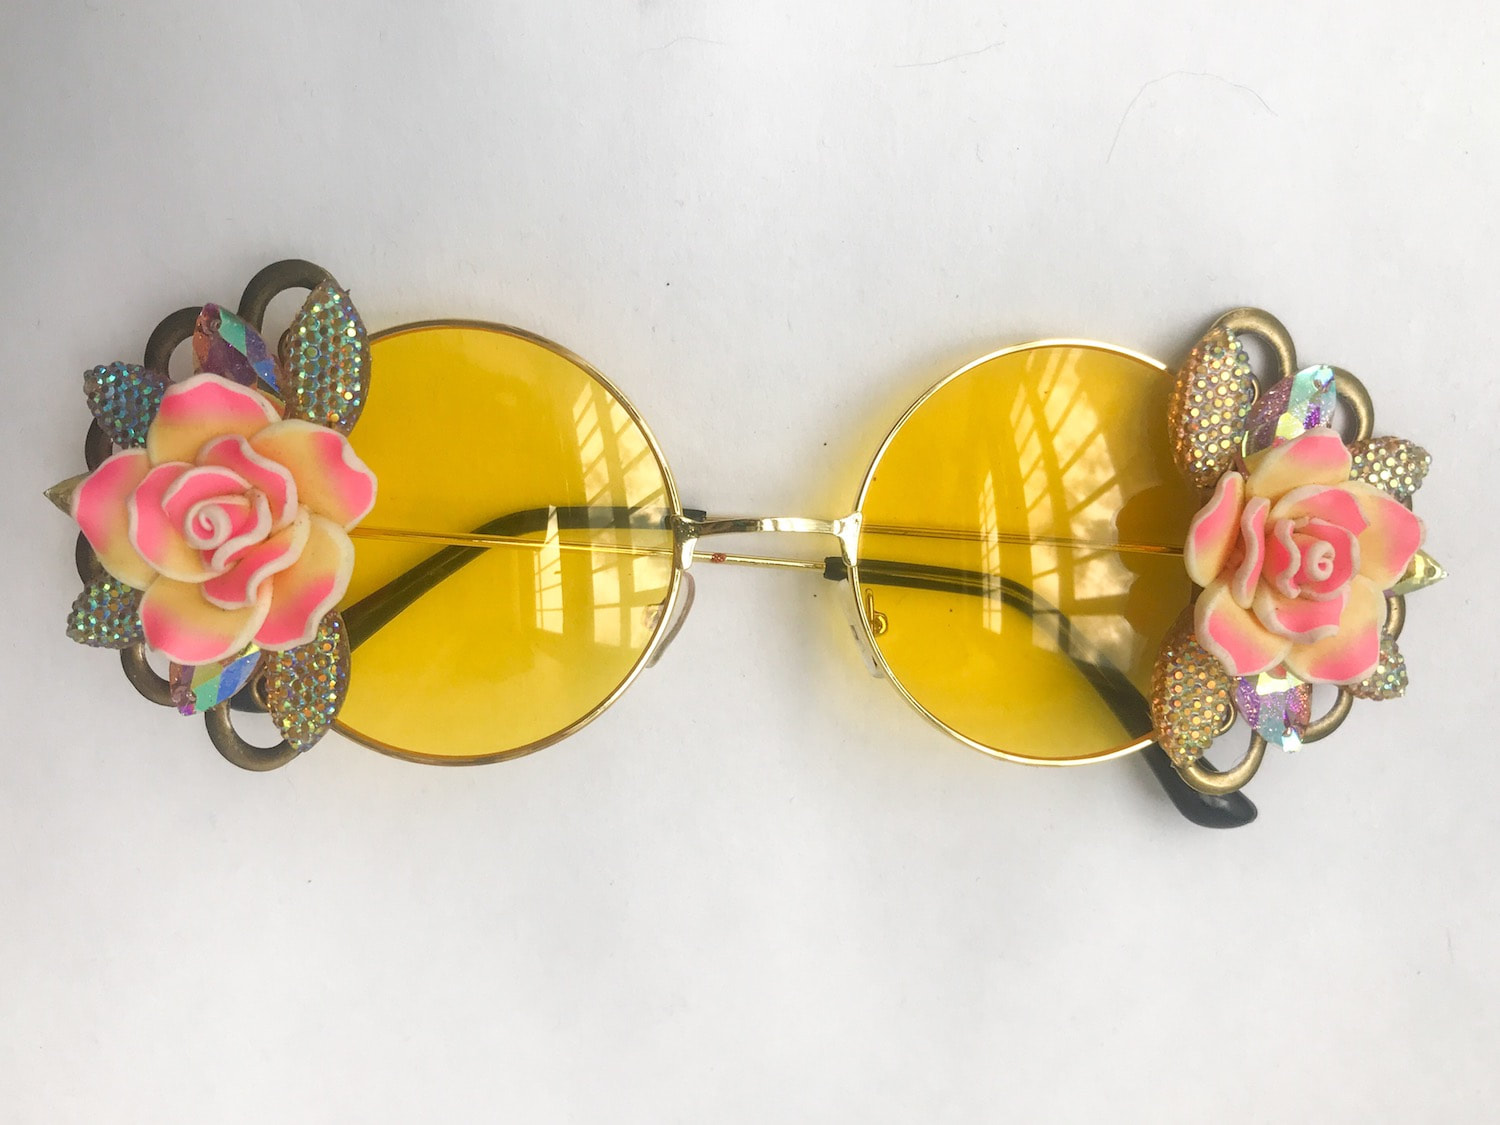 Yellow Floral Rhinestone Sunglasses Yellow Sunglasses Handcrafted With Flowers And Rhinestones